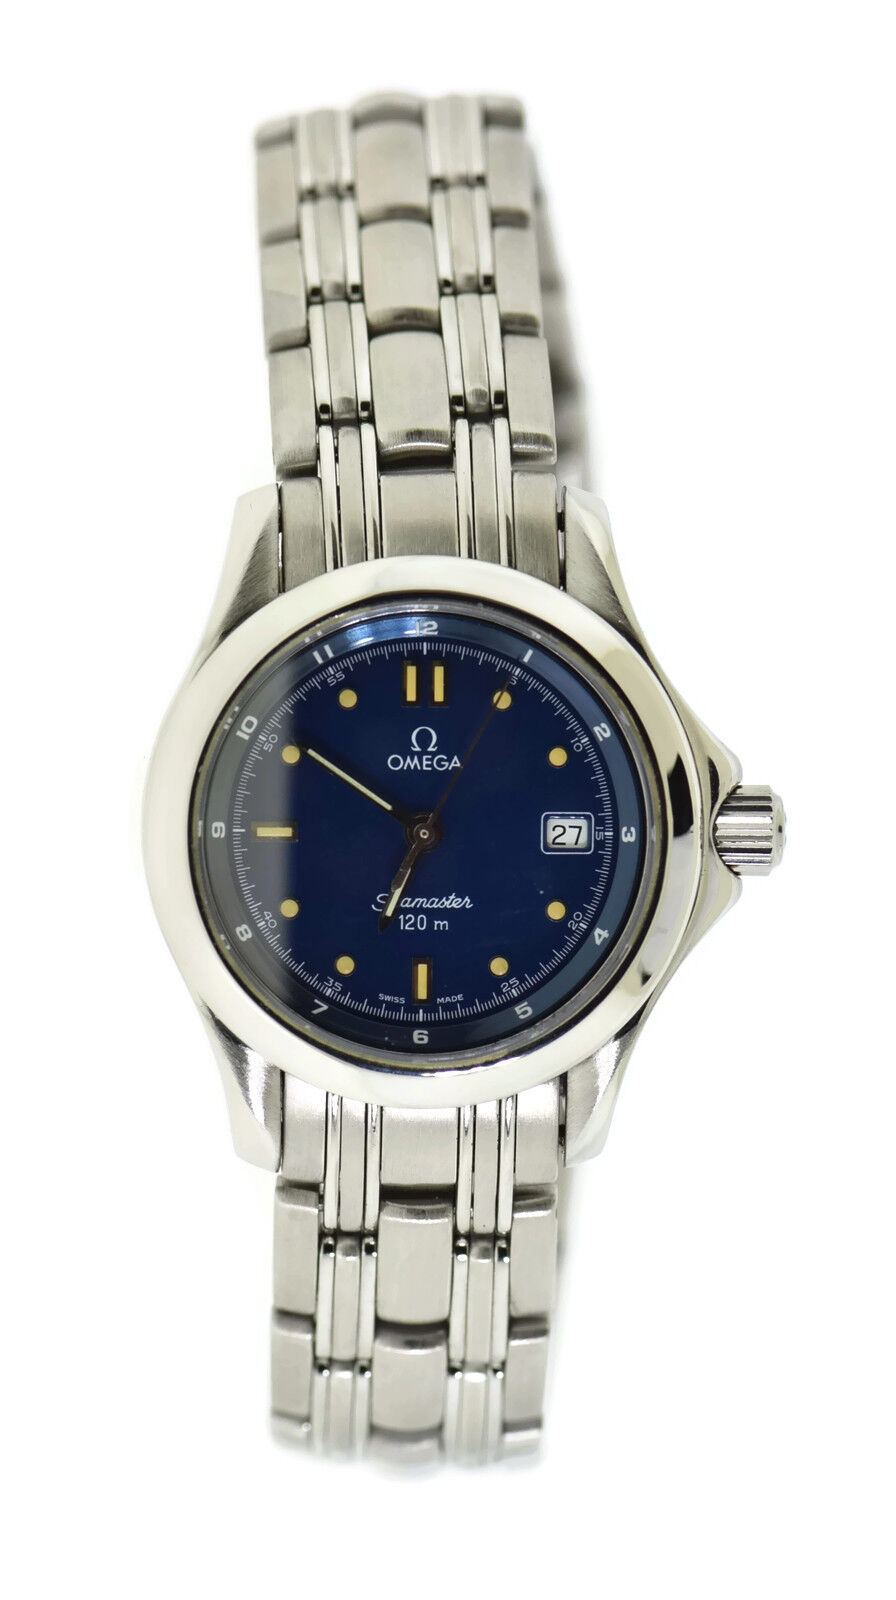 Omega Seamaster 120m Blue Dial Stainless Steel Watch